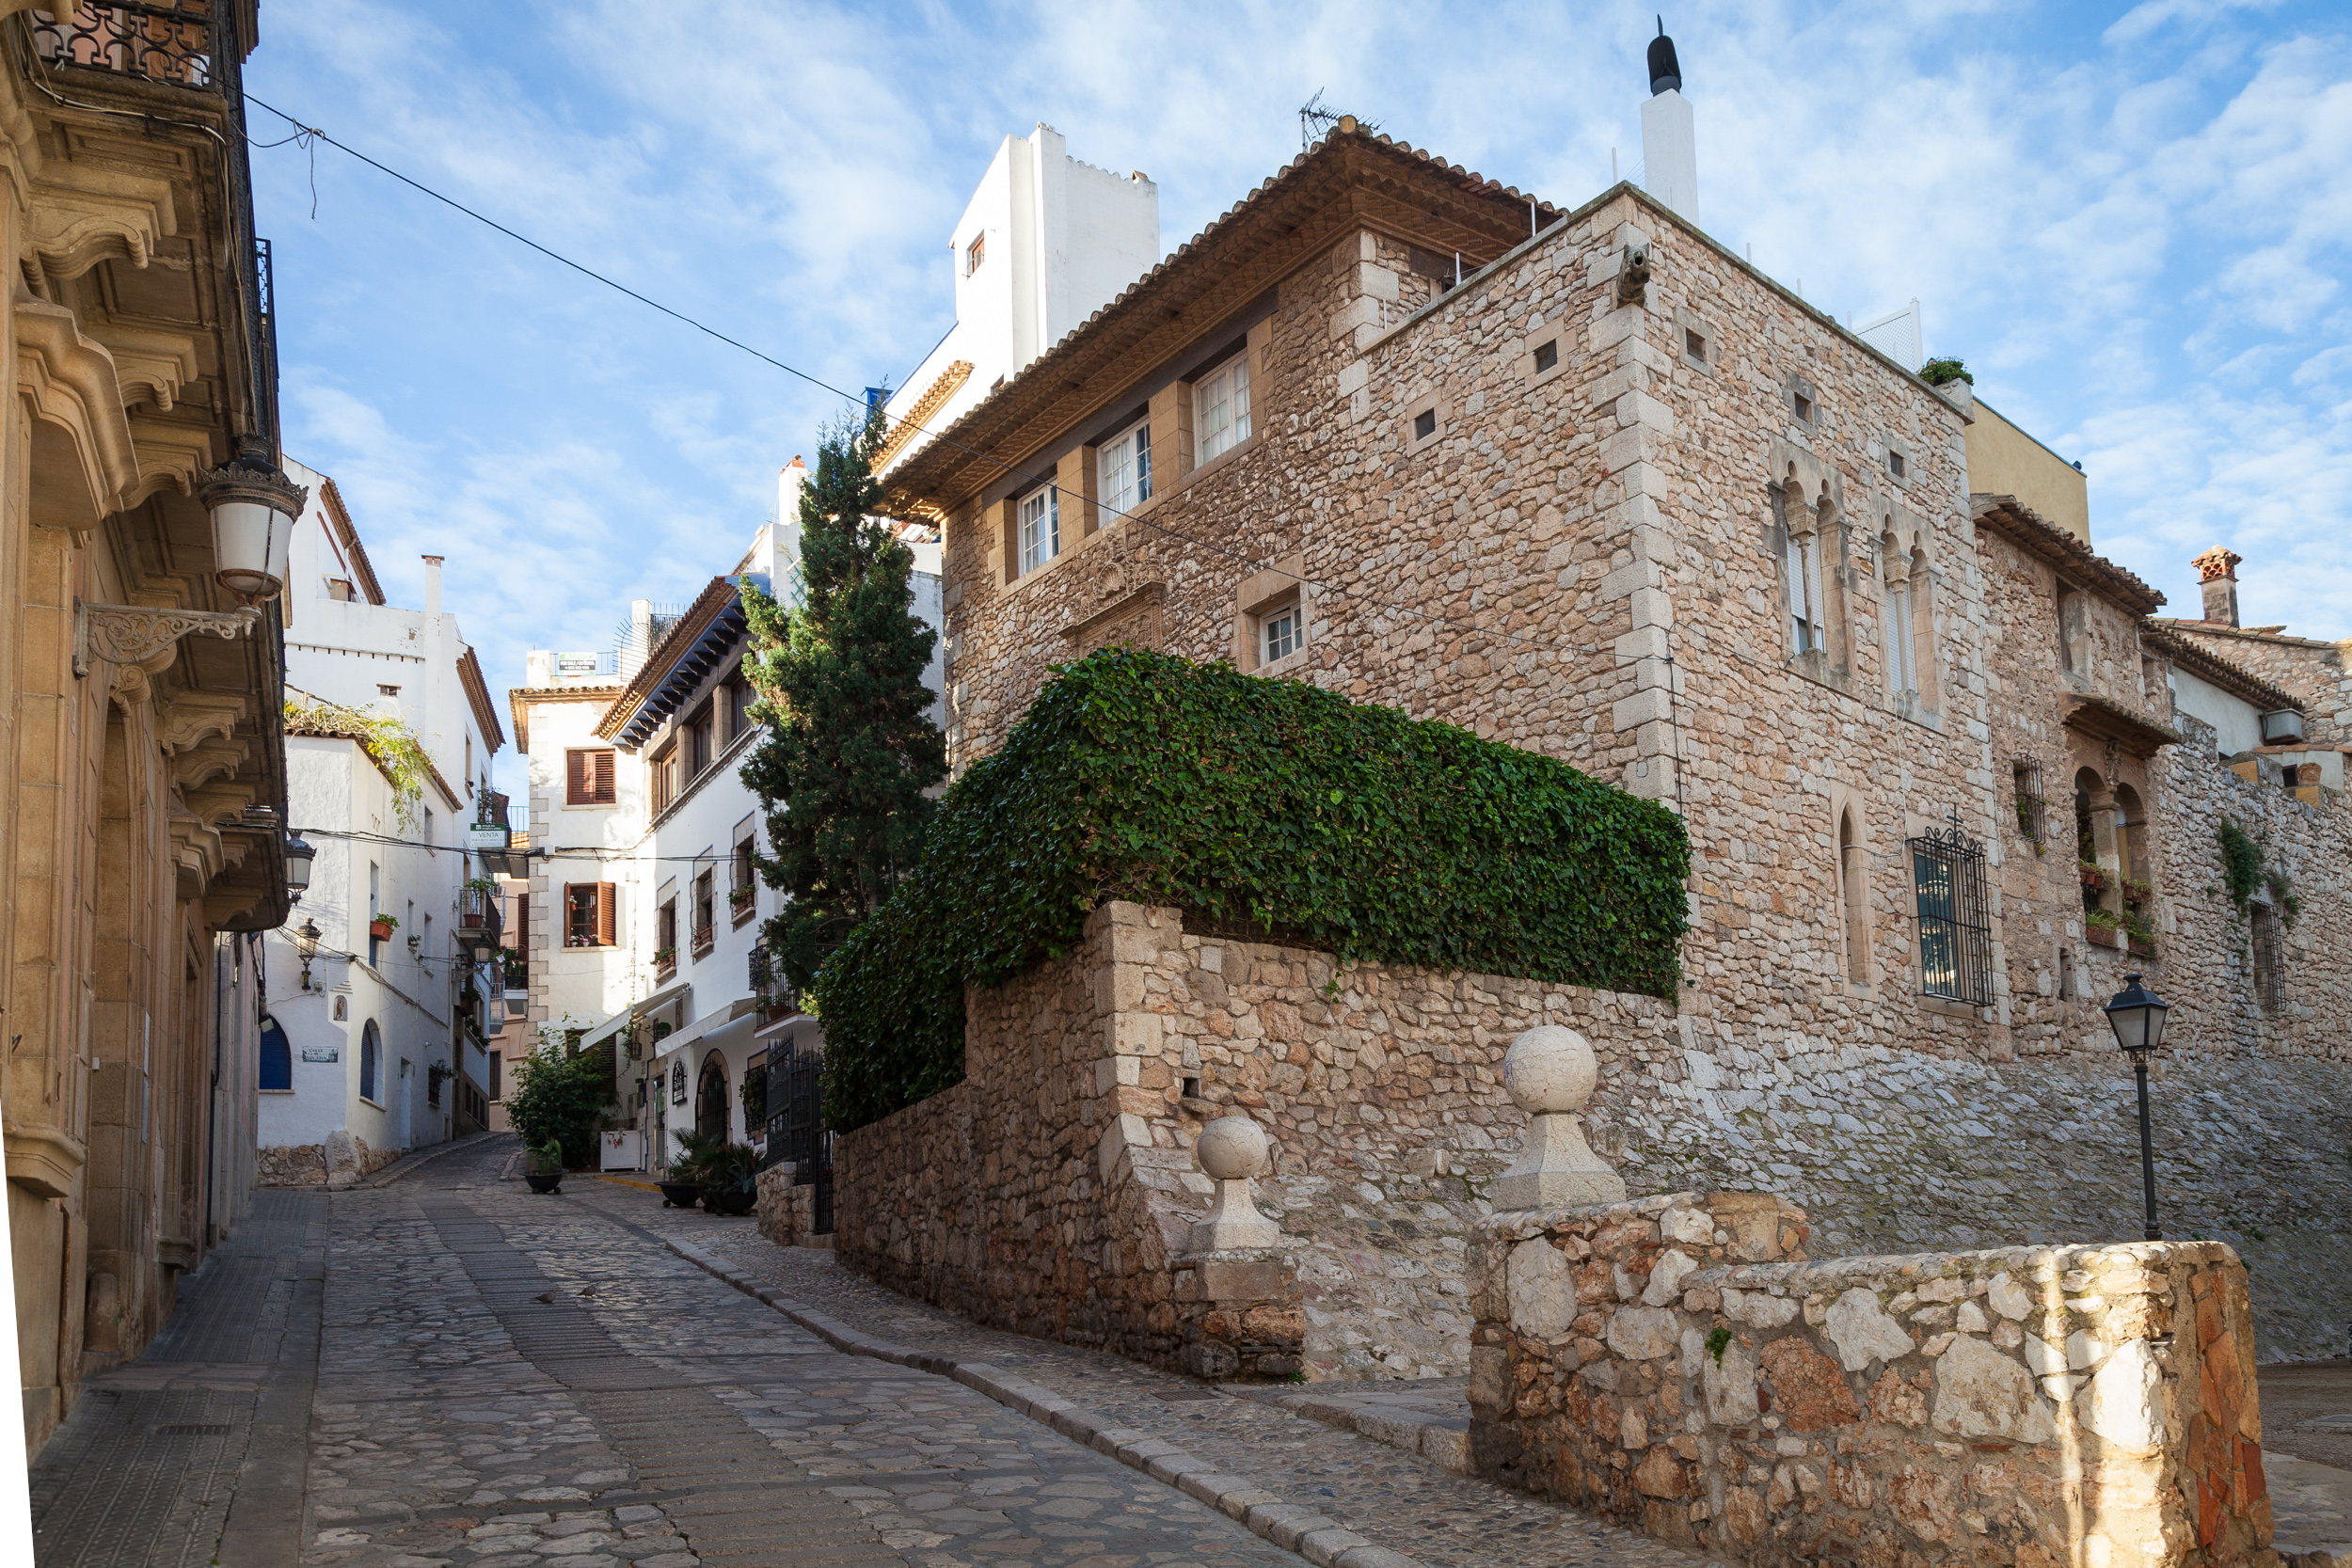 A very old home in Sitges.